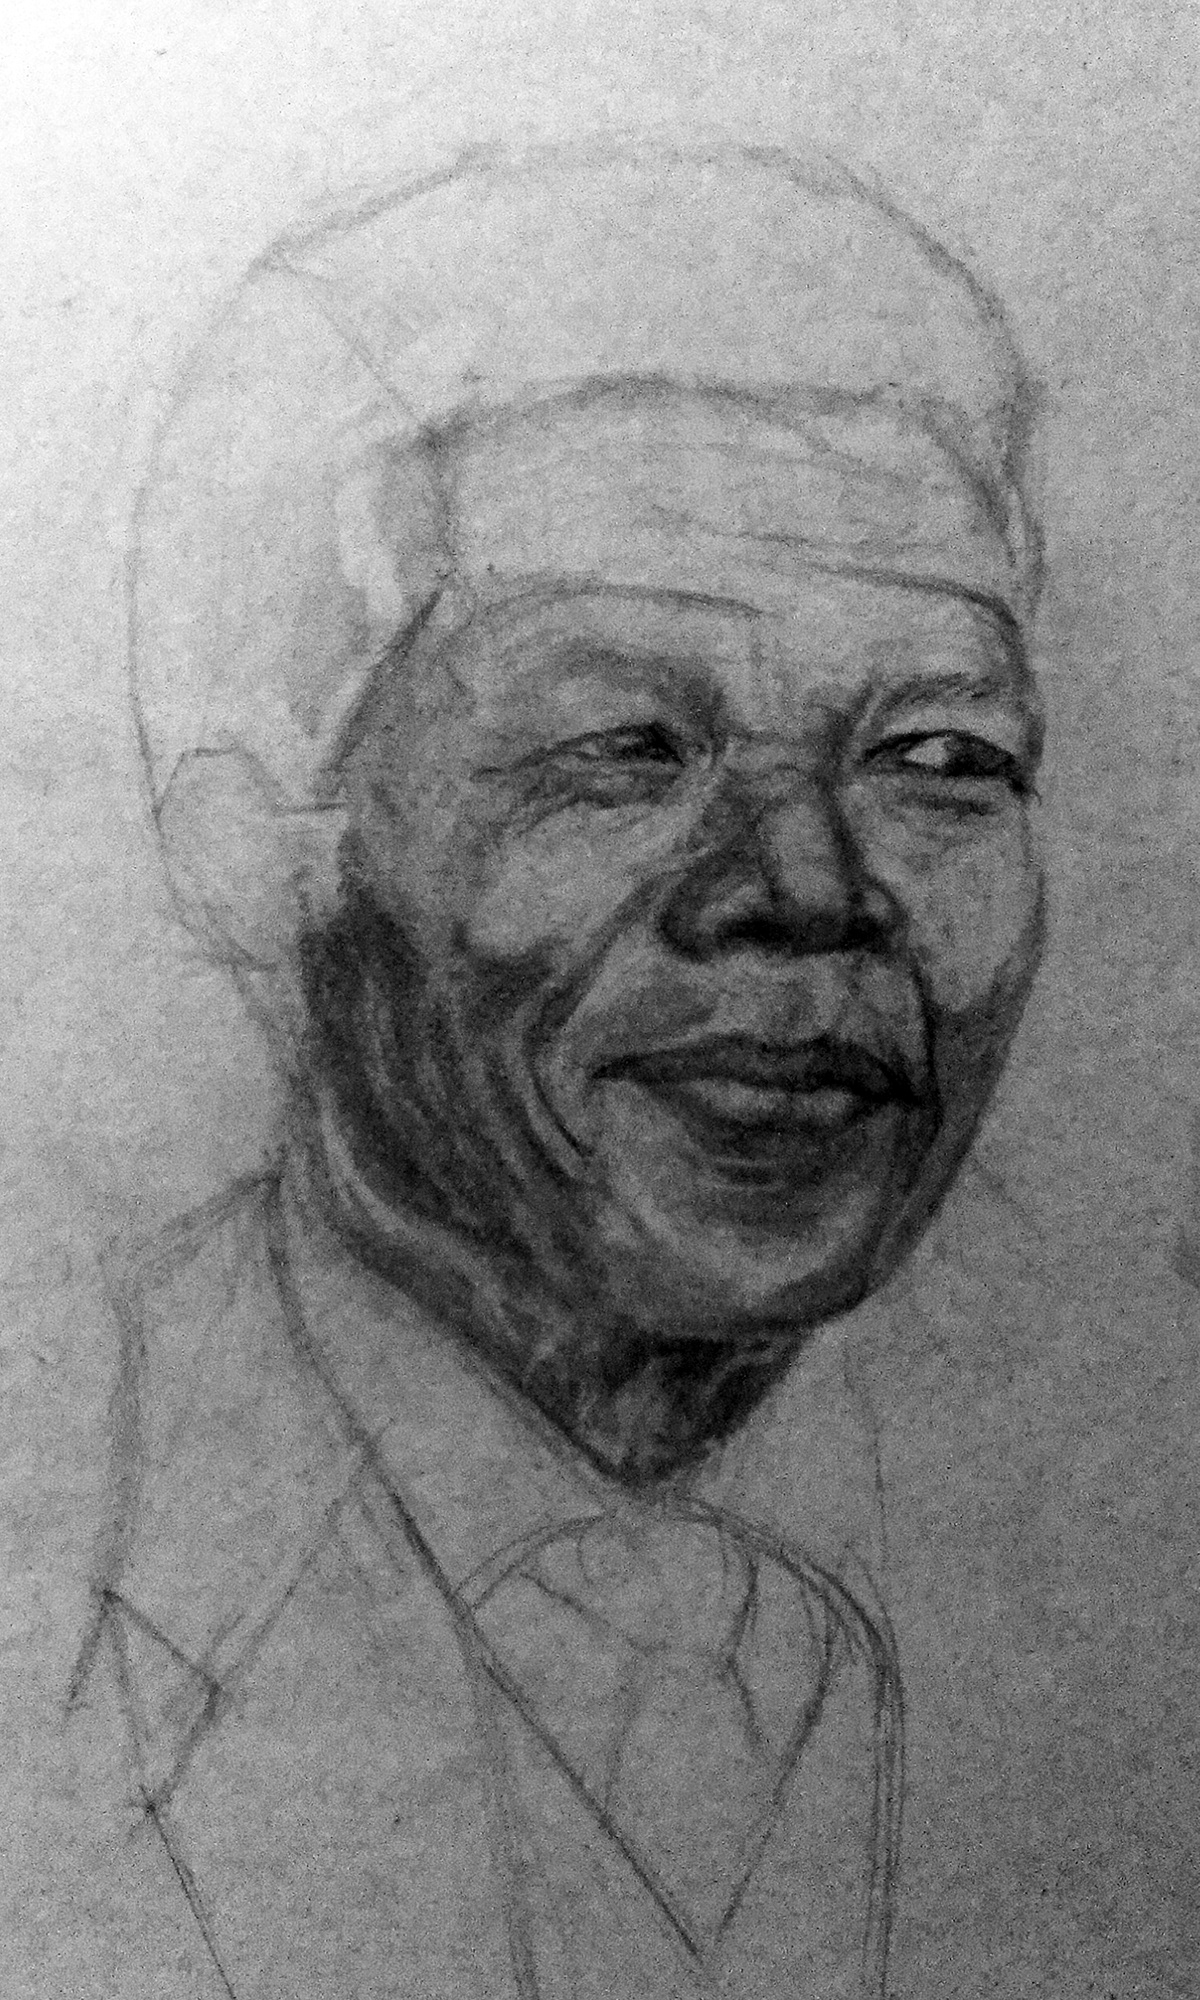 Mandela nelson portrait Political Leaders Memorial Human rights Apartheid Social Justice FREEDOM FIGHTER south africa africa